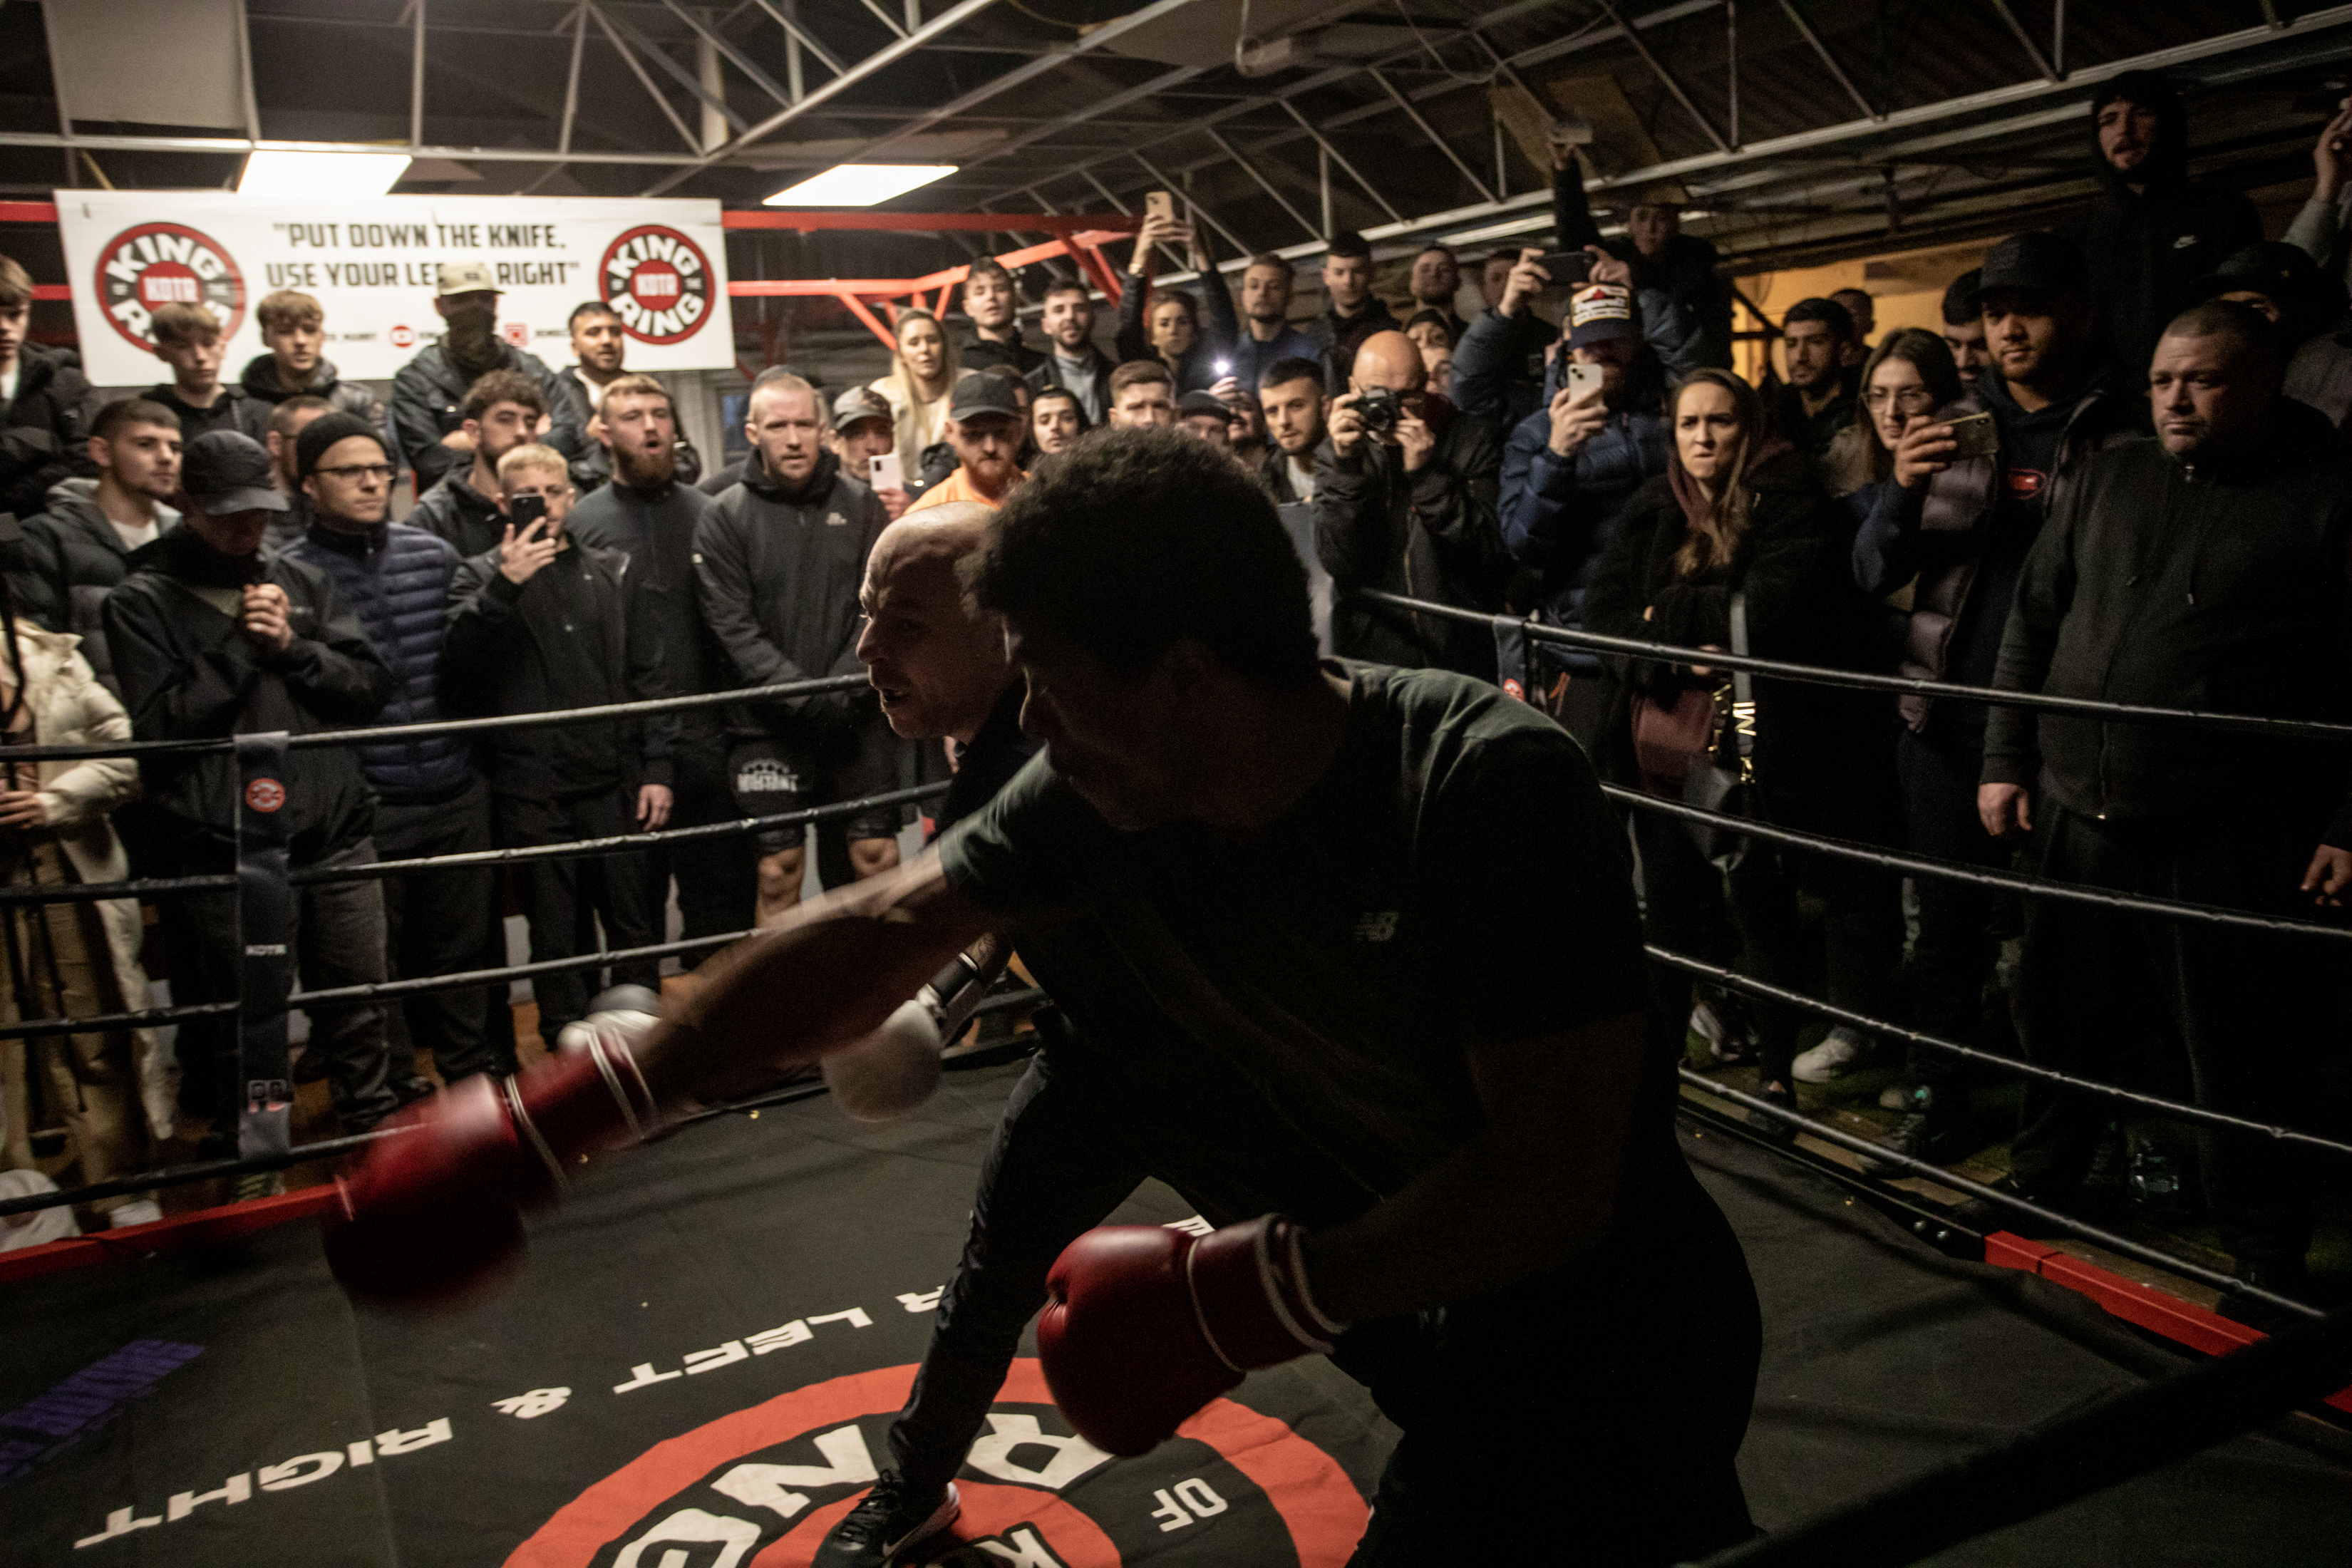 A Look Inside Underground Fight Club King of the Ring